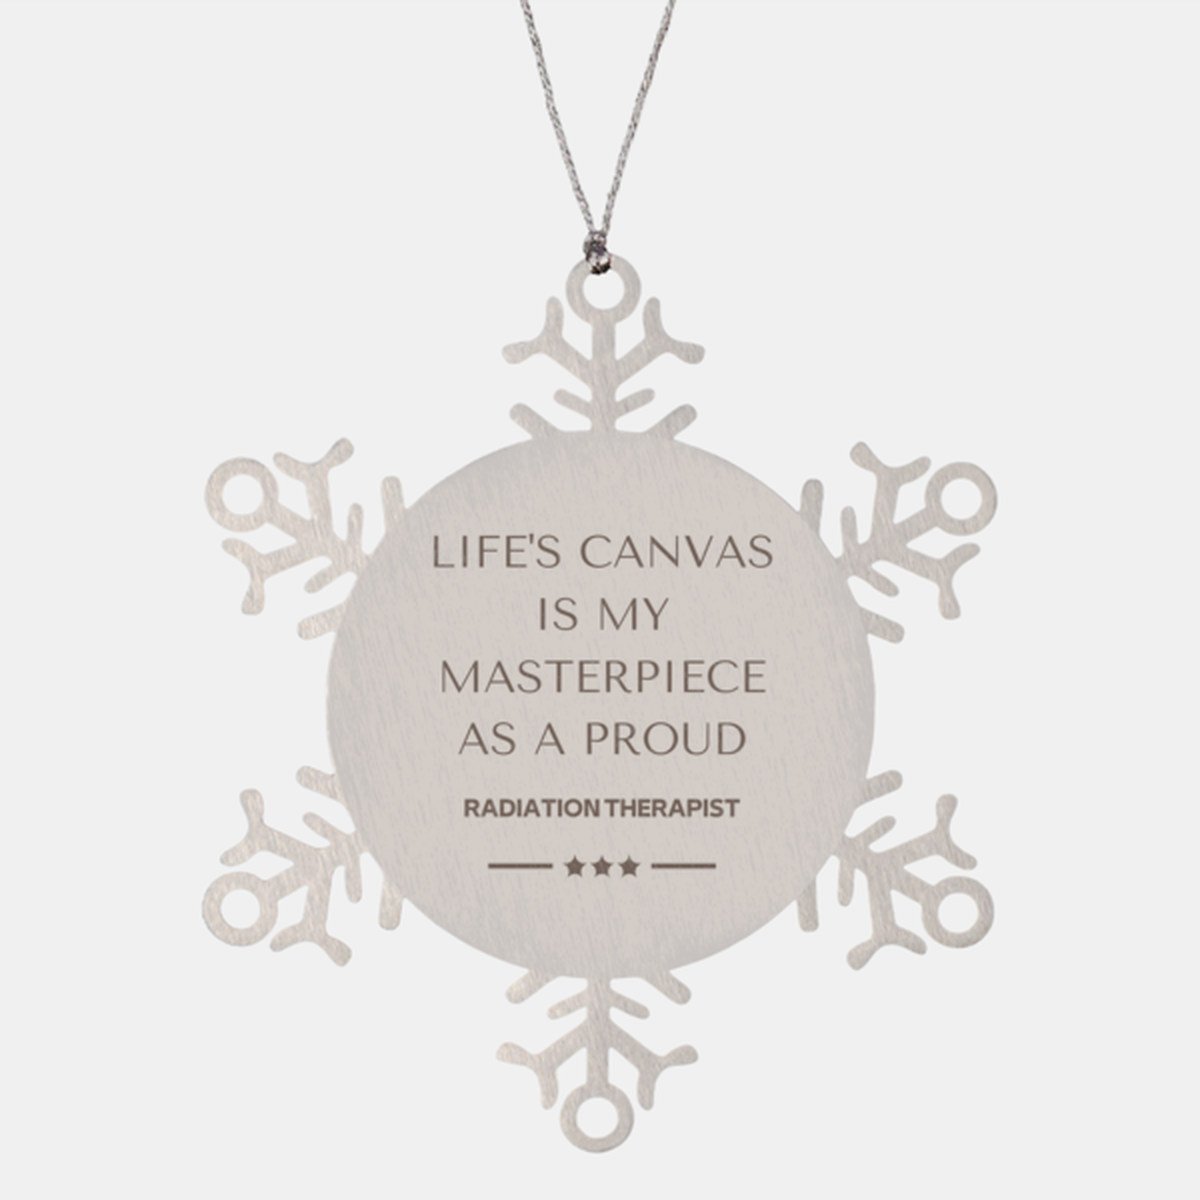 Proud Radiation Therapist Gifts, Life's canvas is my masterpiece, Epic Birthday Christmas Unique Snowflake Ornament For Radiation Therapist, Coworkers, Men, Women, Friends